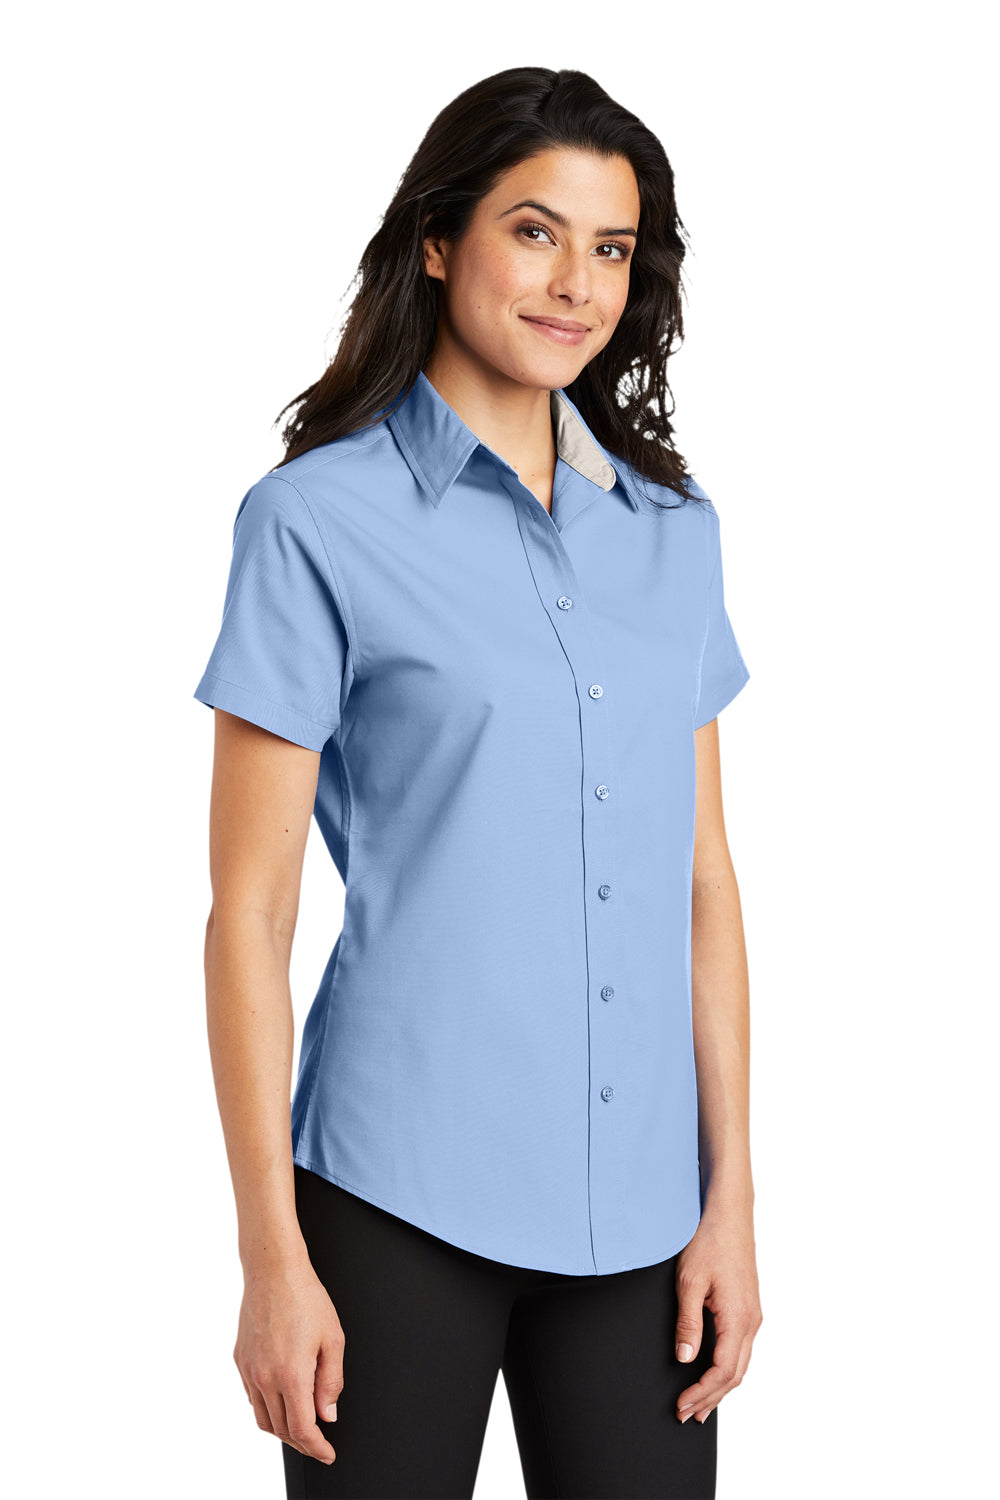 Port Authority L508 Womens Easy Care Wrinkle Resistant Short Sleeve Button Down Shirt Light Blue 3Q